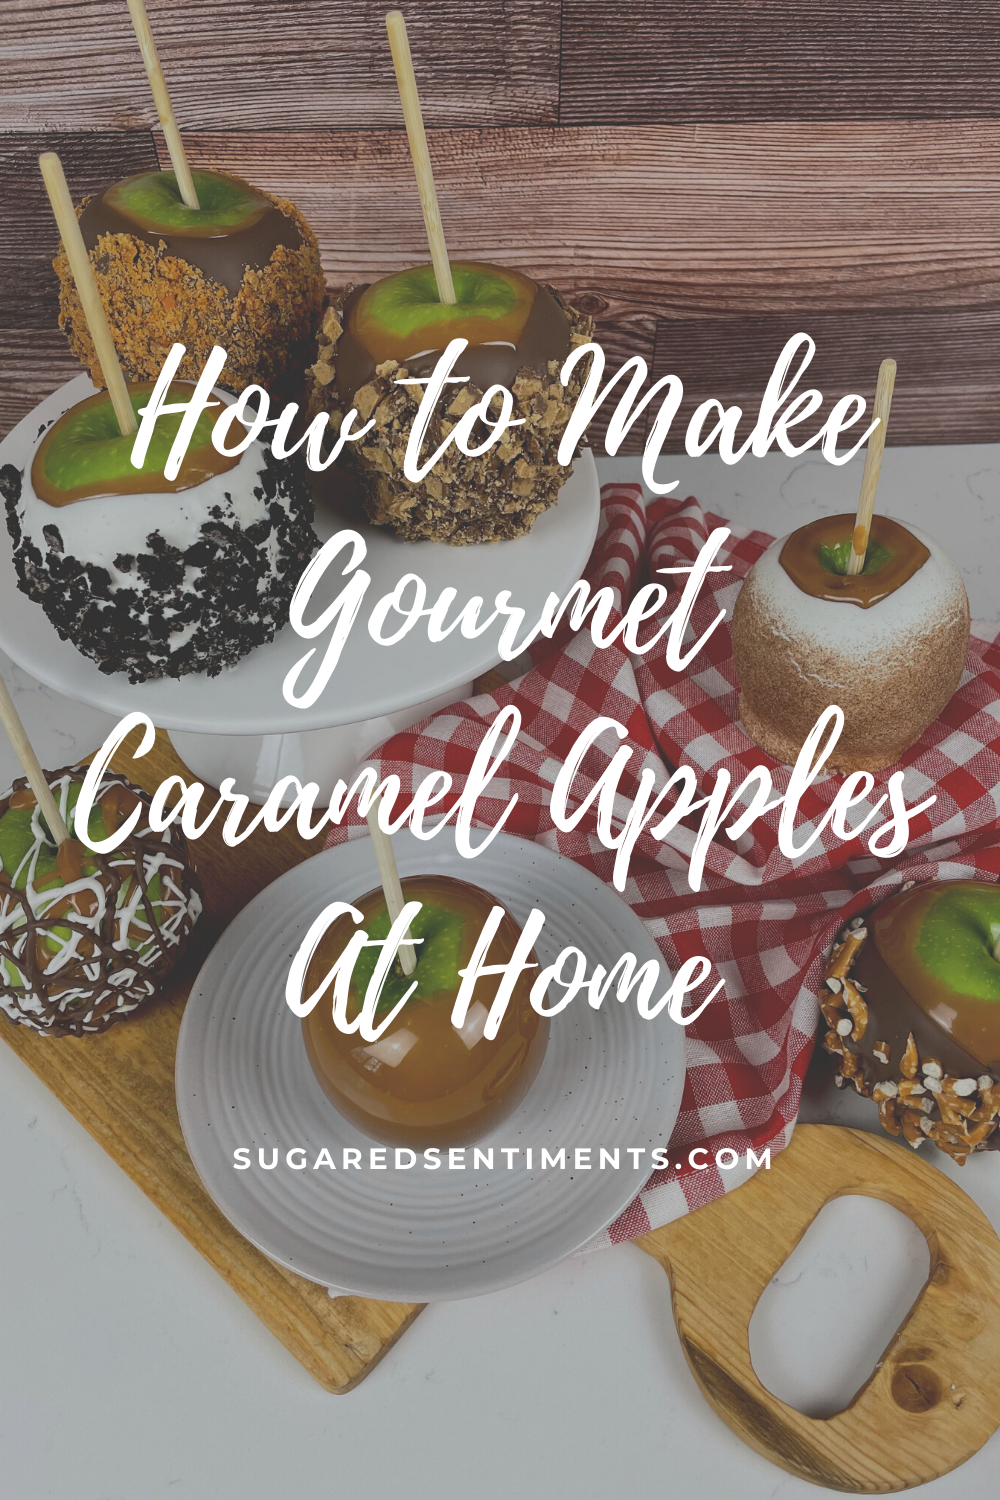 How To Make: Gourmet Caramel Apples At Home